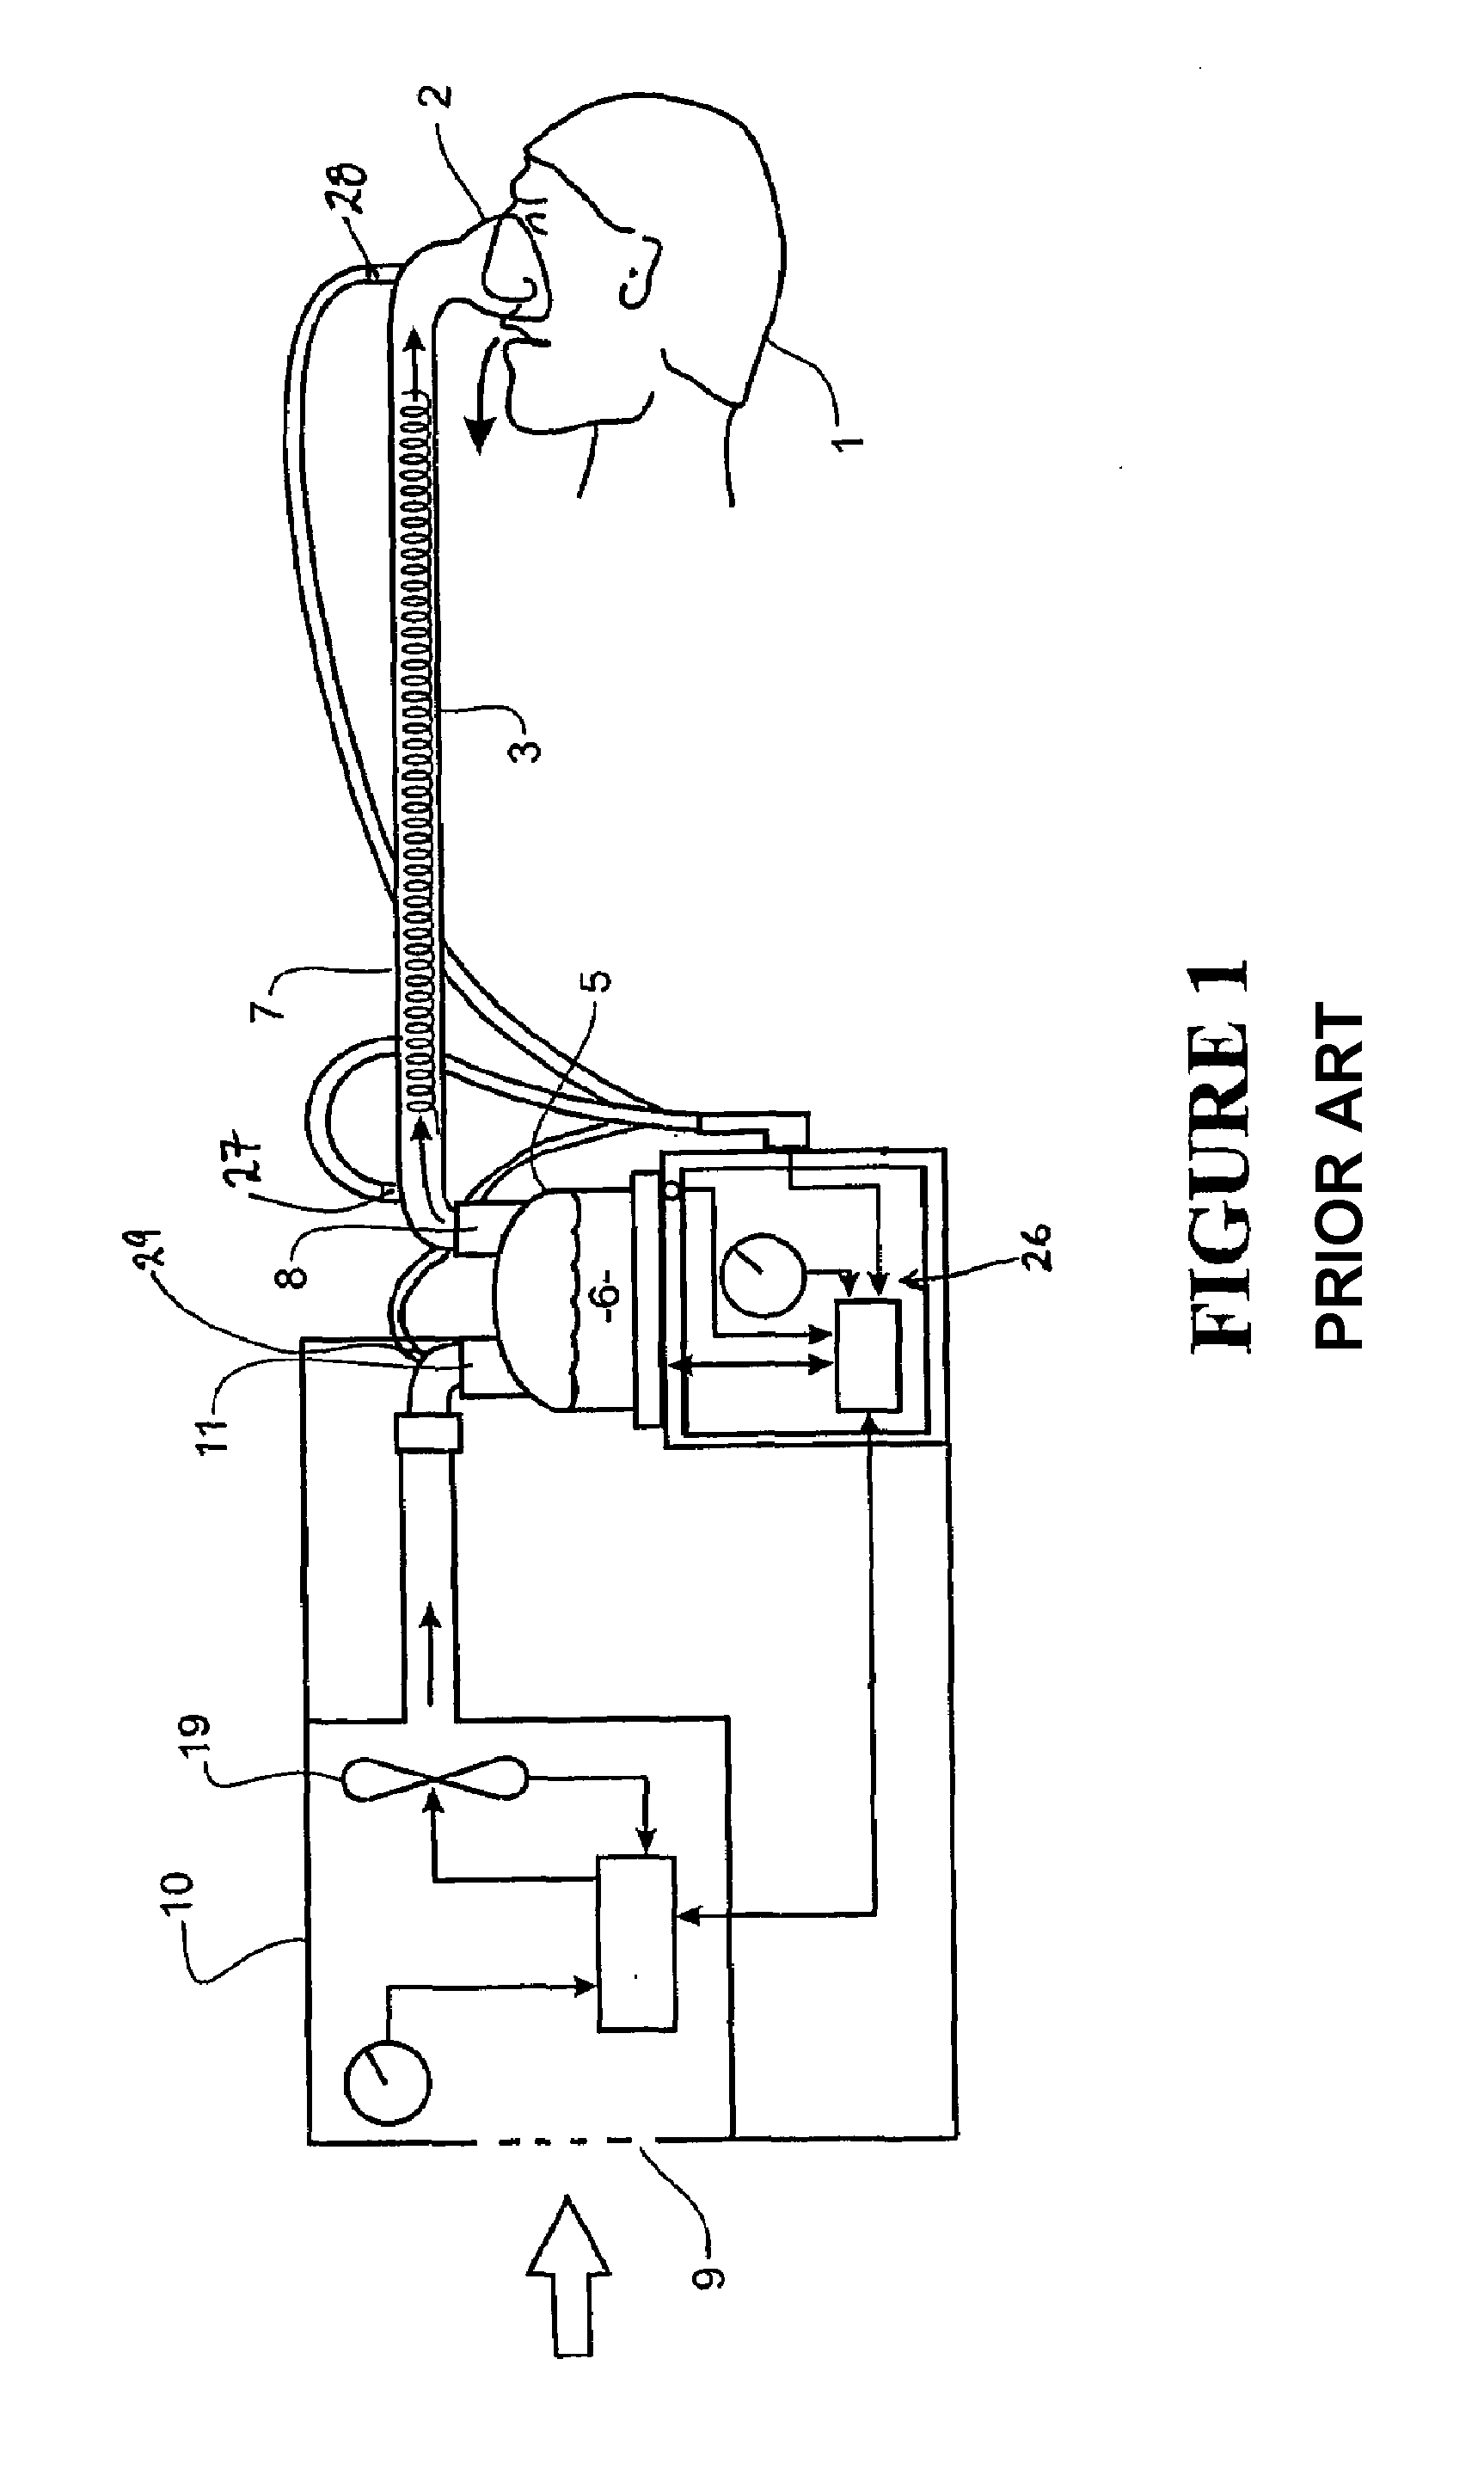 Humidifier with internal heating element and heater plate